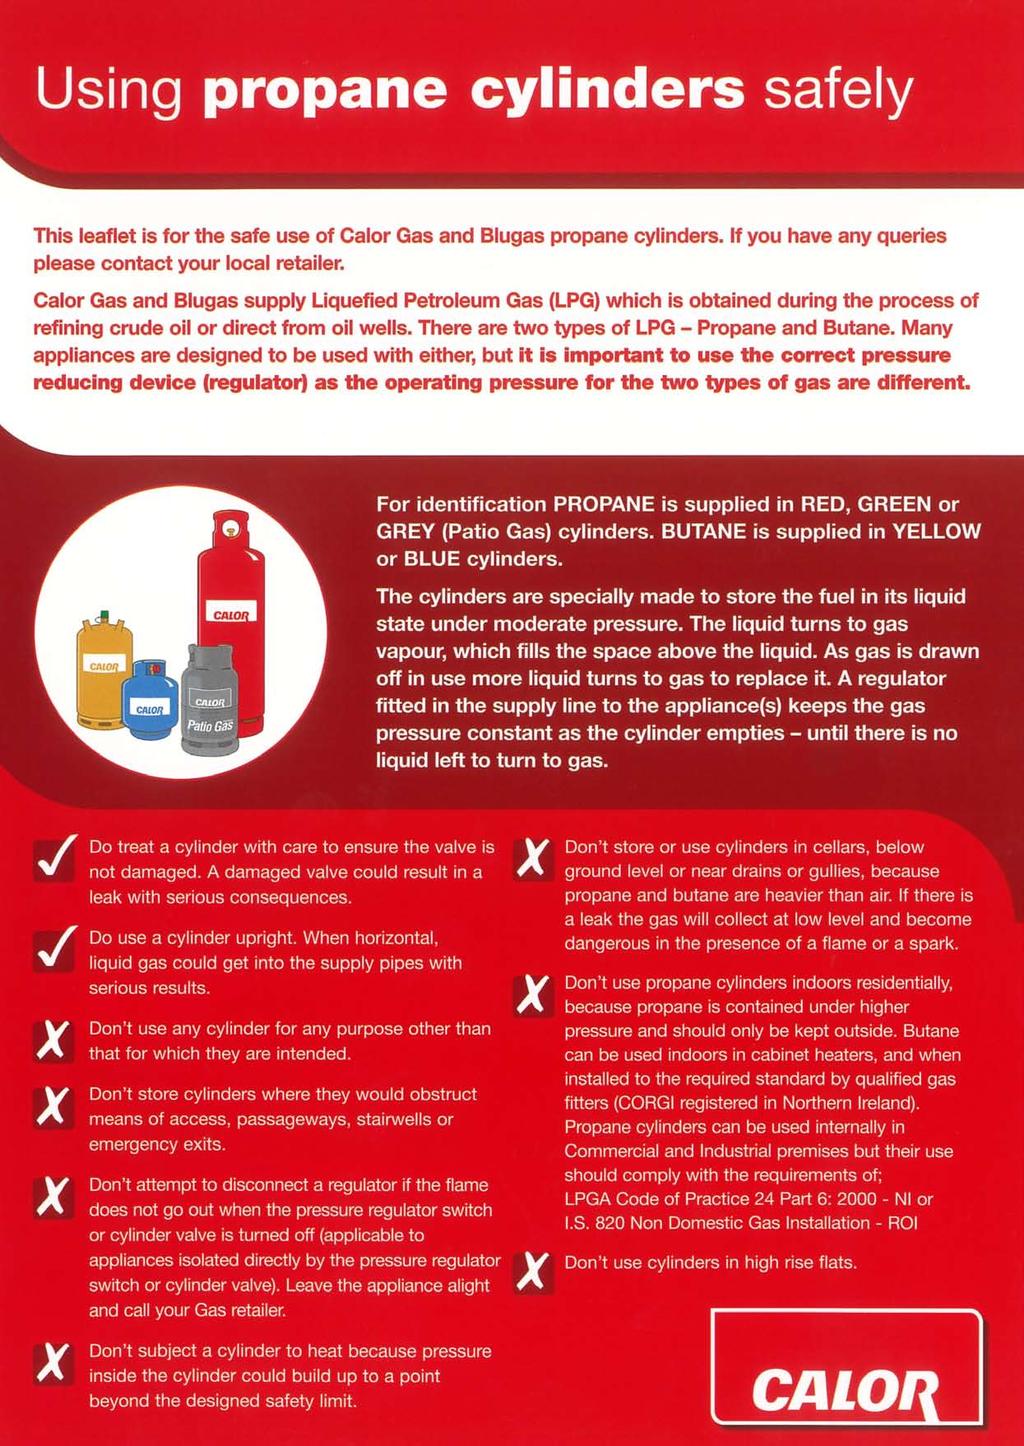 Using propane cylinders safely This leaflet is for the safe use of Calor Gas propane cylinders. If you have any queries please contact your local retailer.